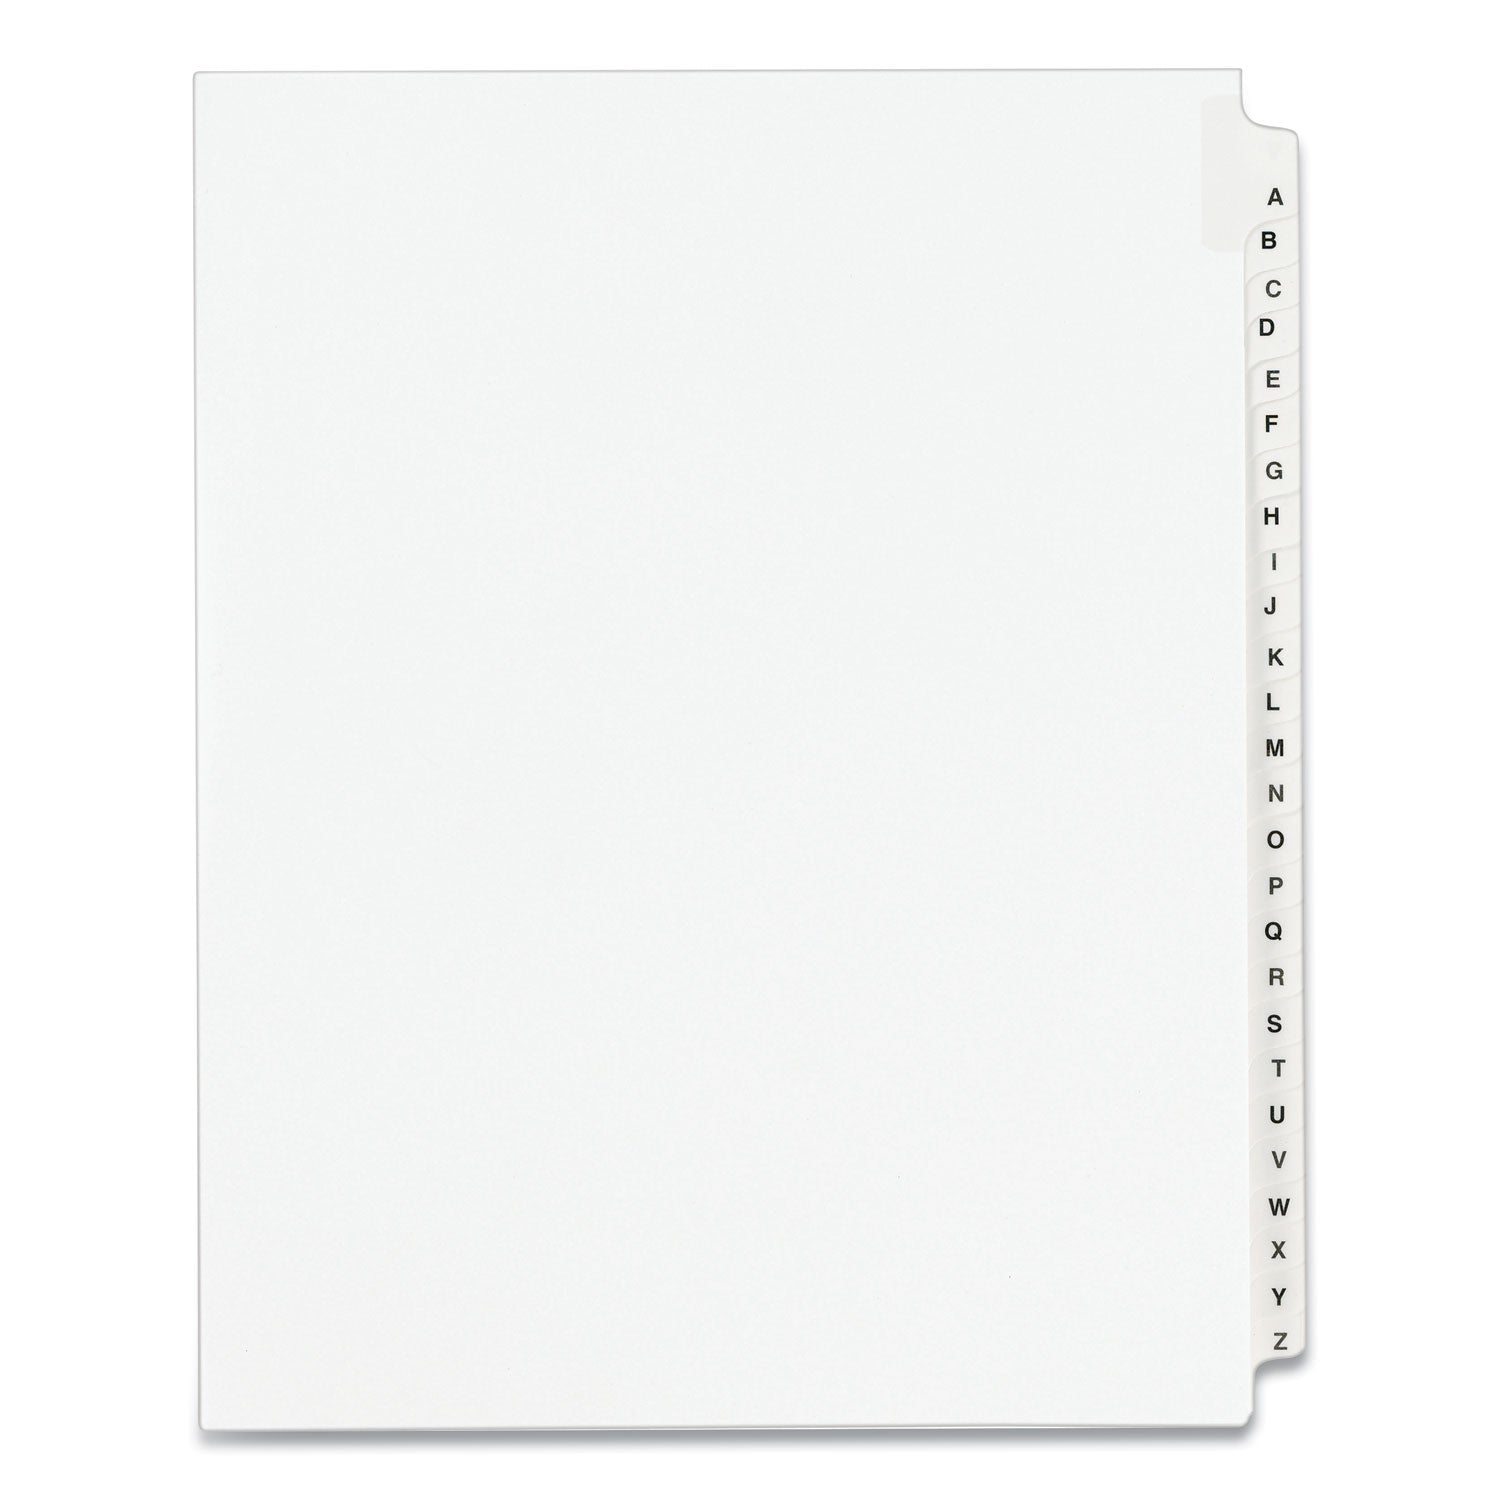 Preprinted Legal Exhibit Side Tab Index Dividers, Avery Style, 26-Tab, A to Z, 11 x 8.5, White, 1 Set, (1400) - 